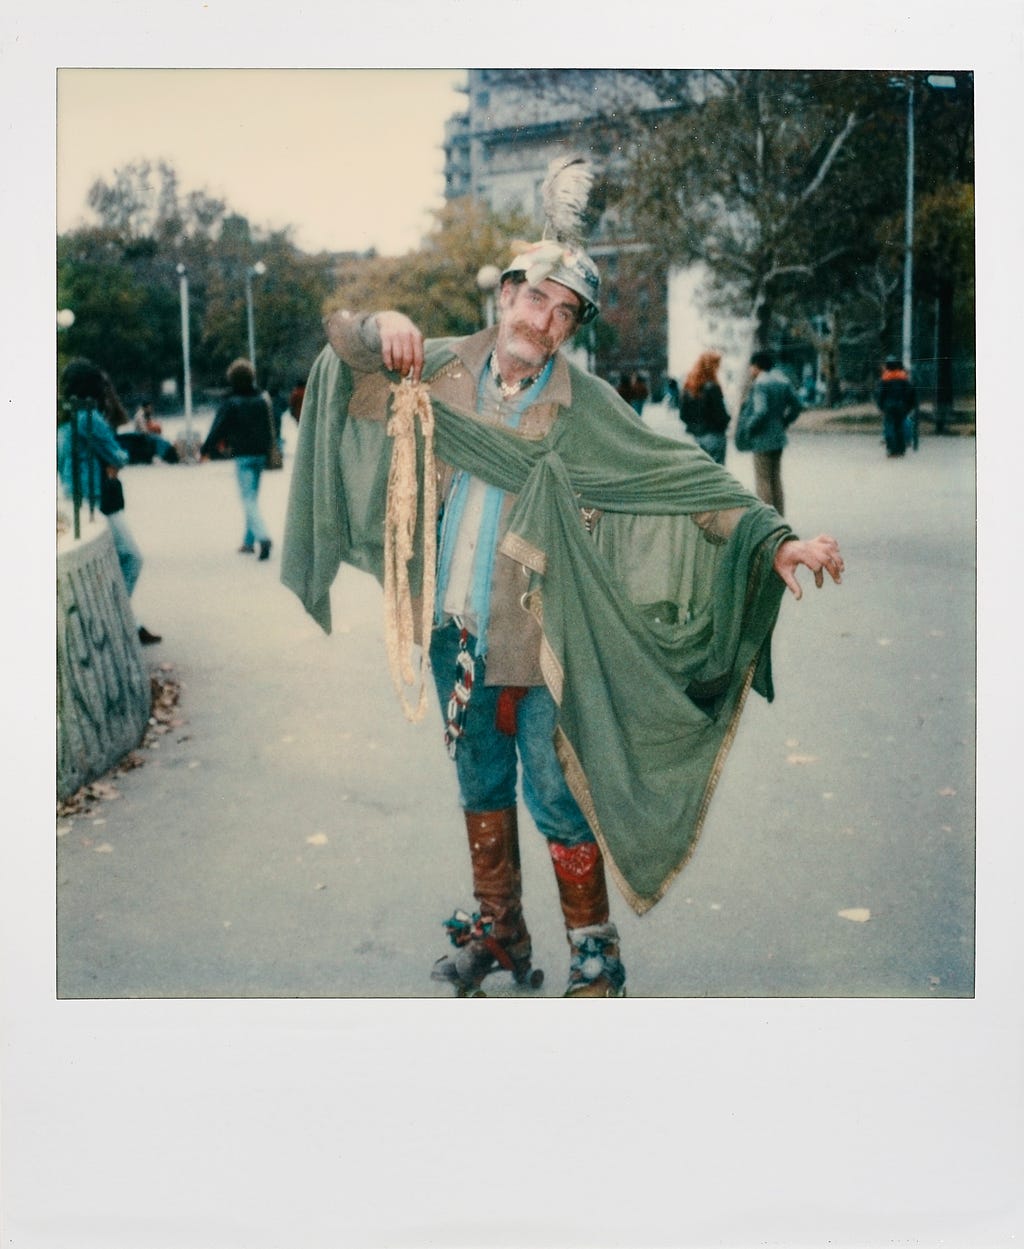 In a park, a man wearing rollerskates and an elaborate shawl, plus a helmet, poses for the camera.